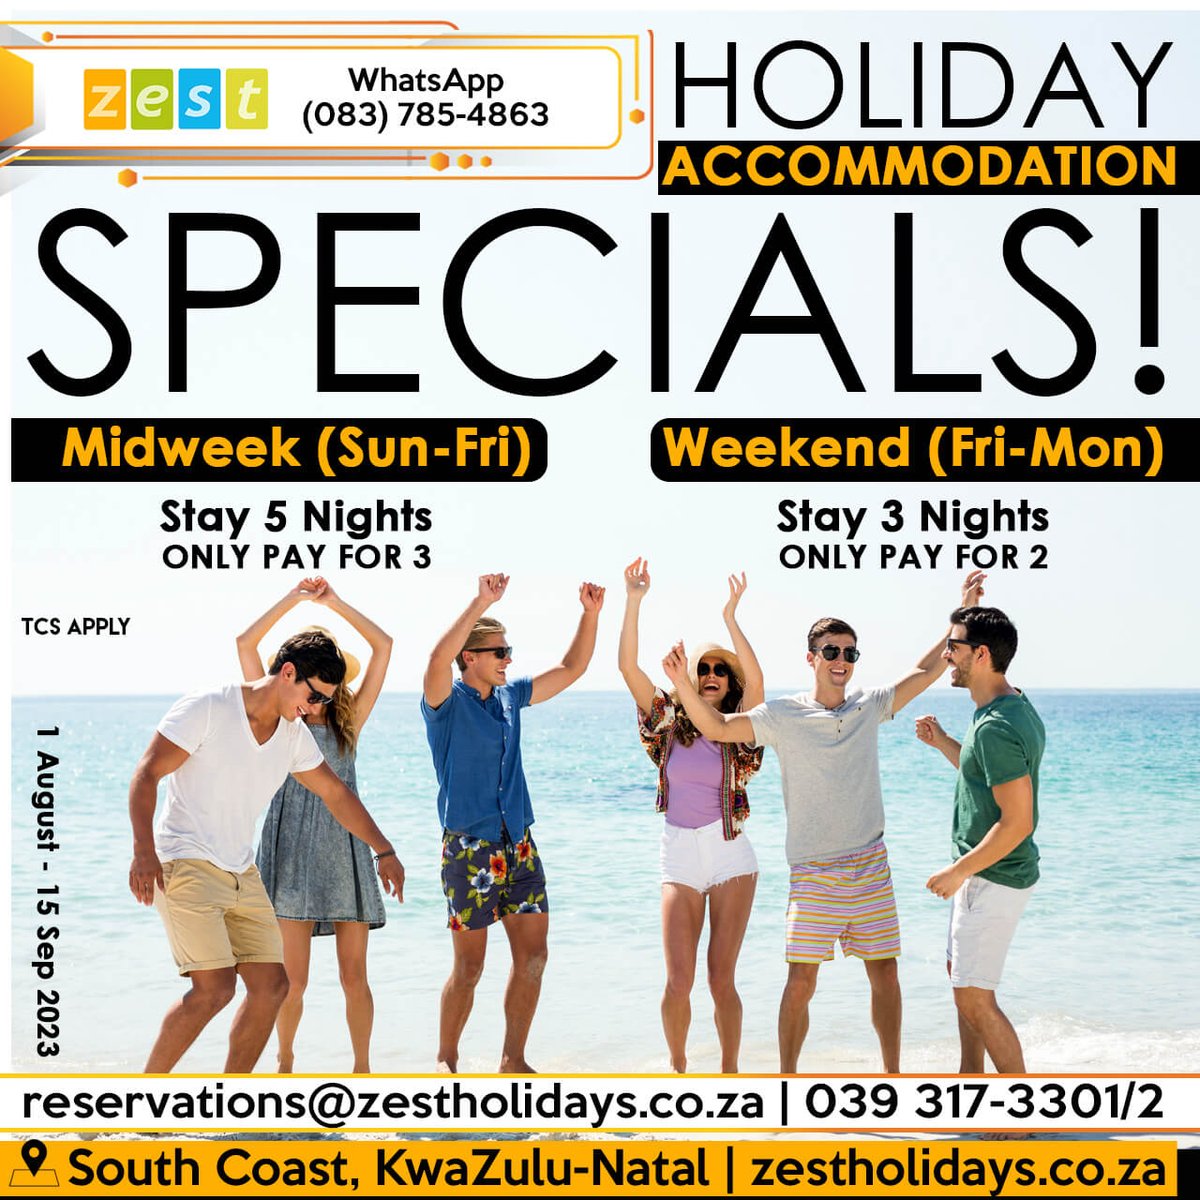 Our epic midweek & weekend special accommodation offer bit.ly/3Hd5271

#holidayspecial #holidayspecials #travel #holiday #romantic #bookdirect #familyfriendly #vacation #summerholidays #shortbreaks #getaway #weekendaway #holidayrental #selfcatering